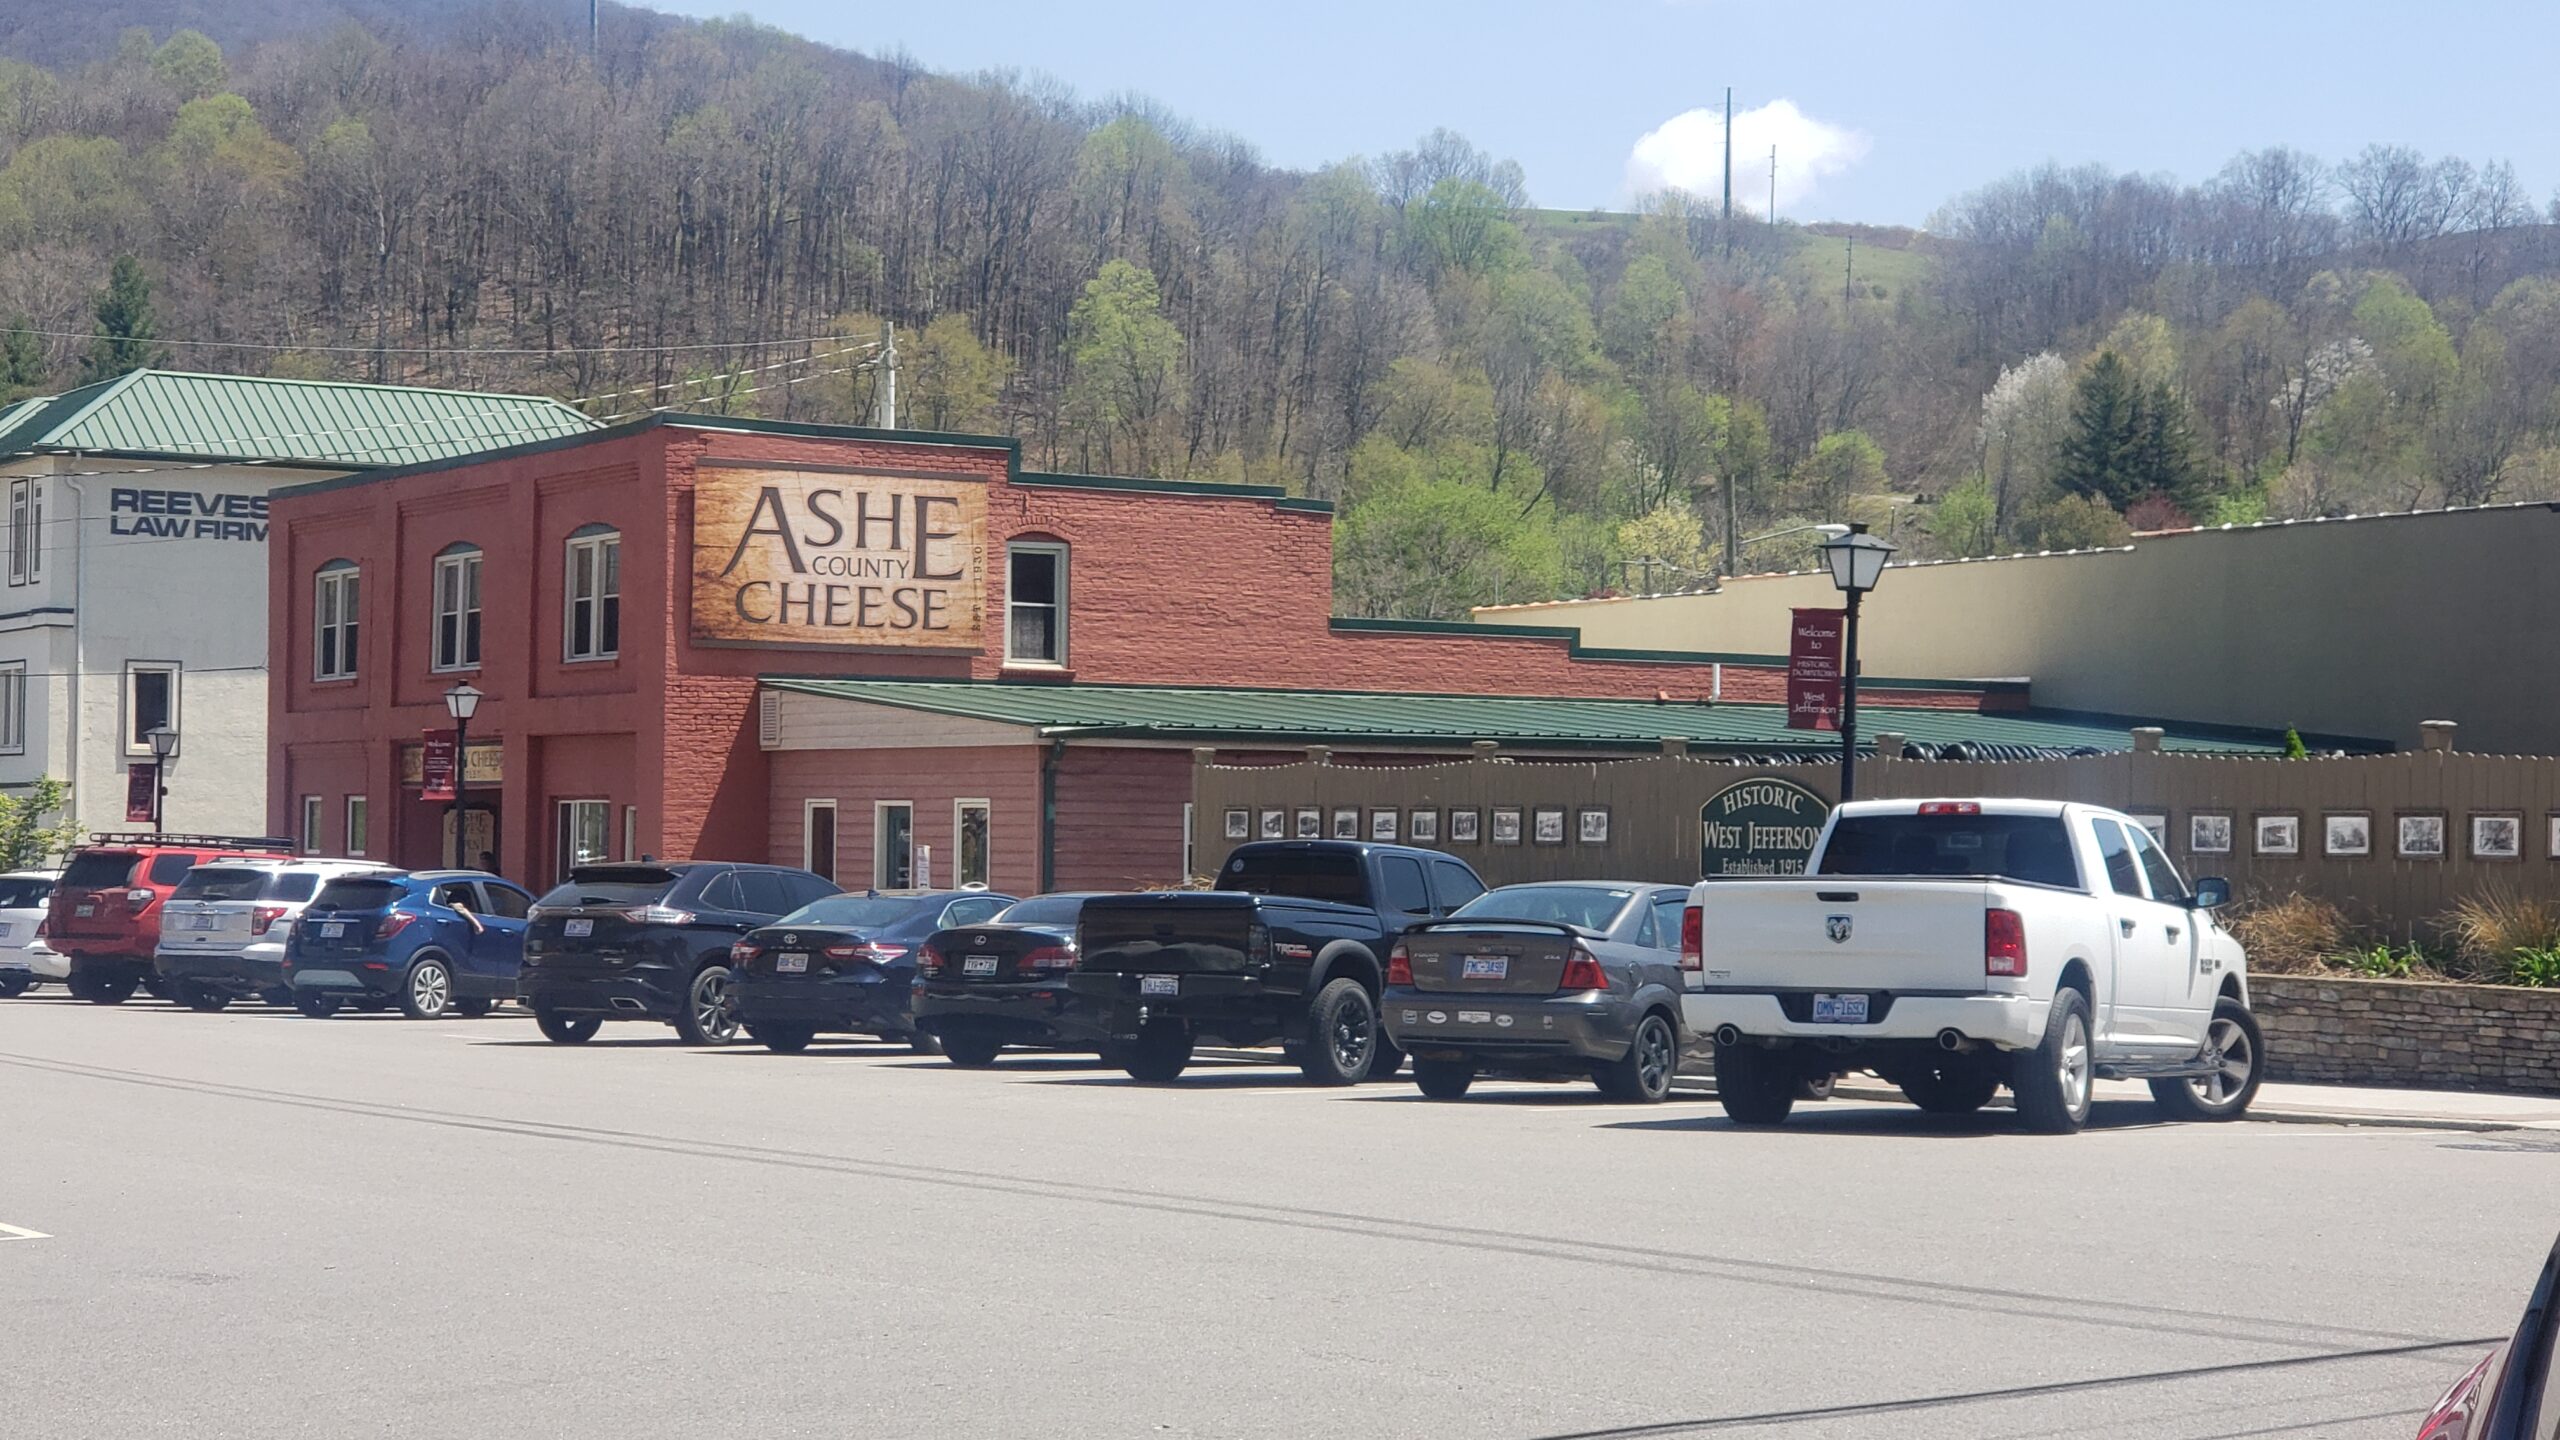 Image of Ashe County Auto License Plate